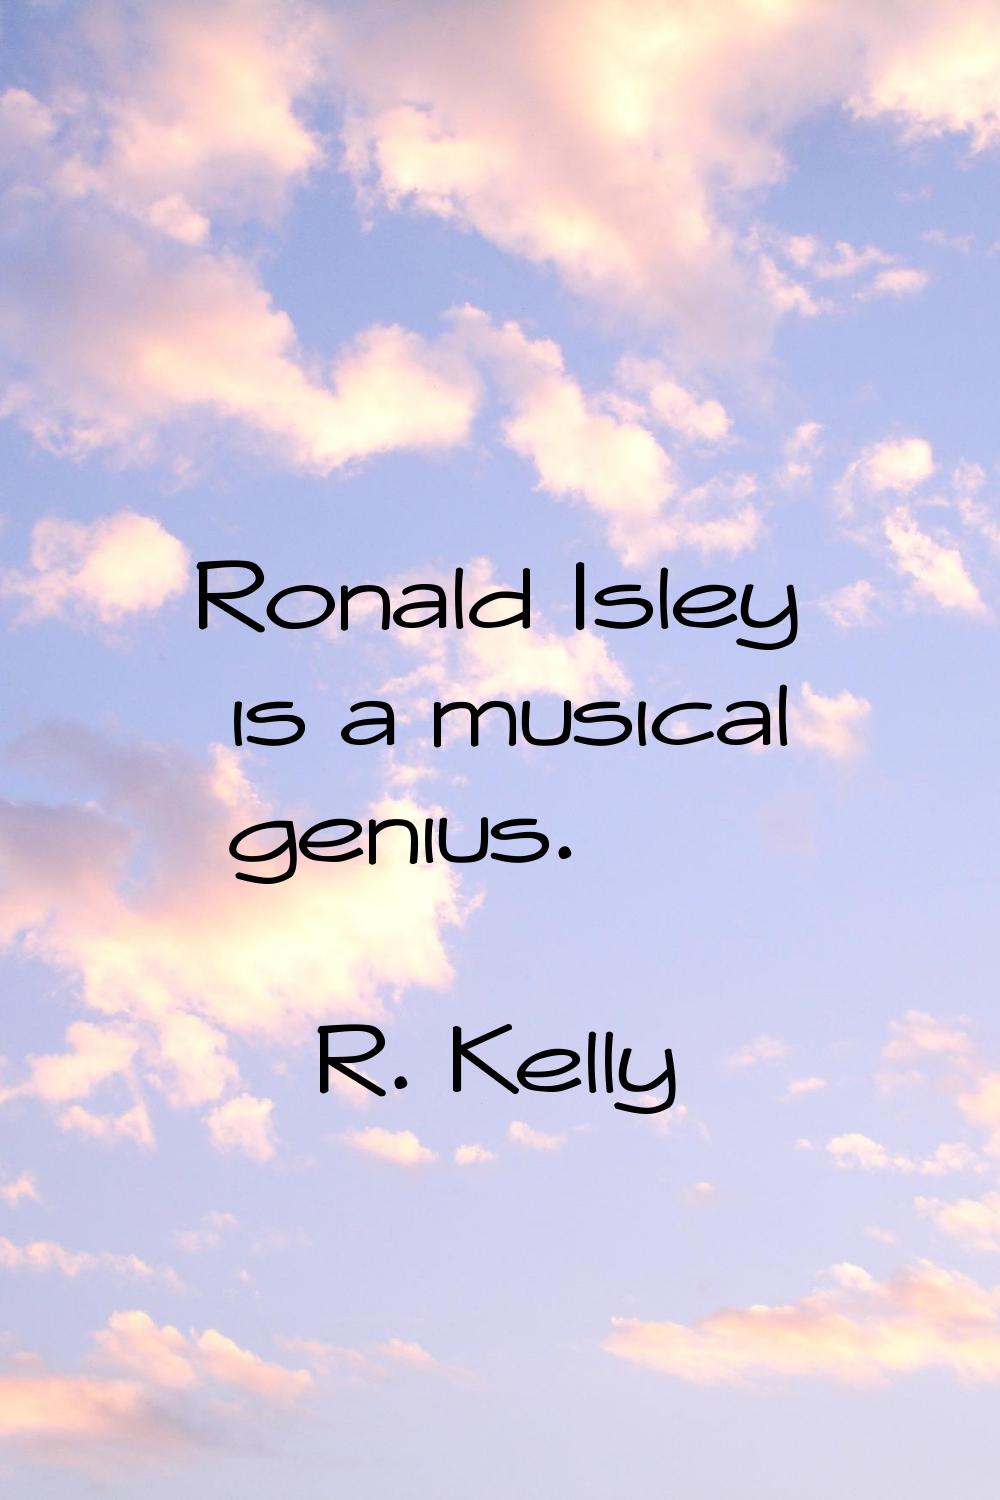 Ronald Isley is a musical genius.